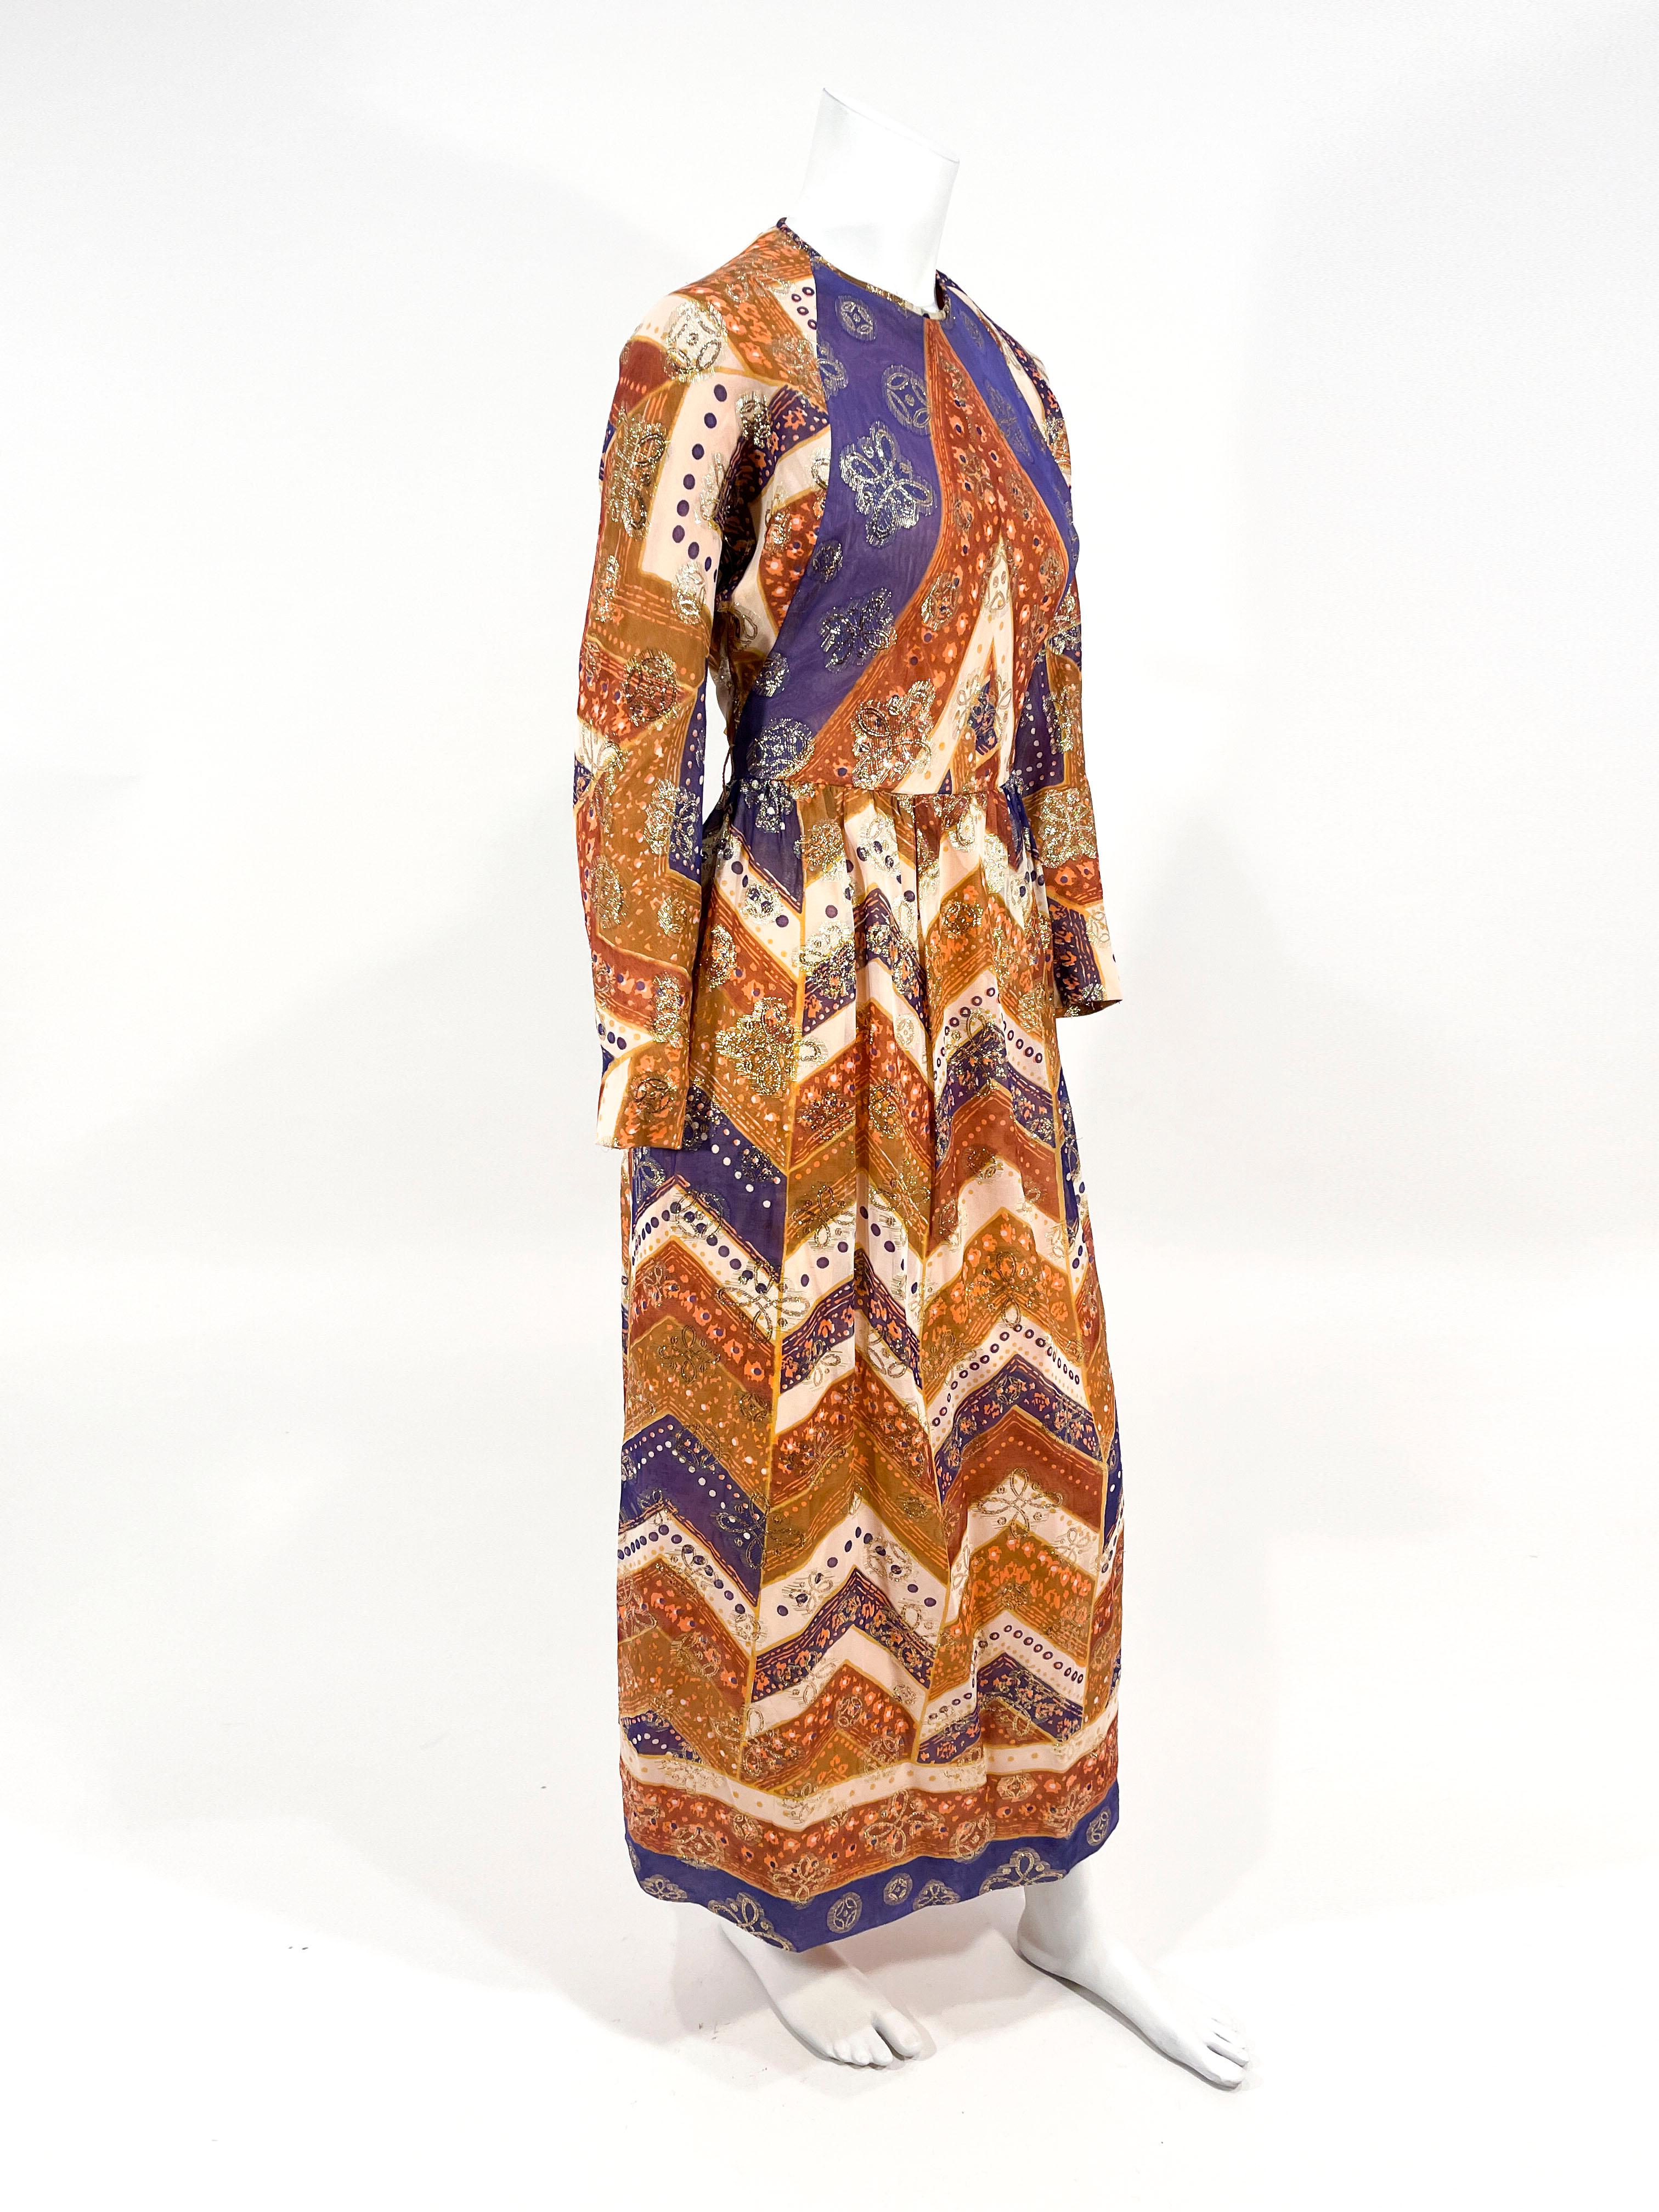 Women's 1970s Anthony Muto Chevron Printed and Metallic Dress For Sale